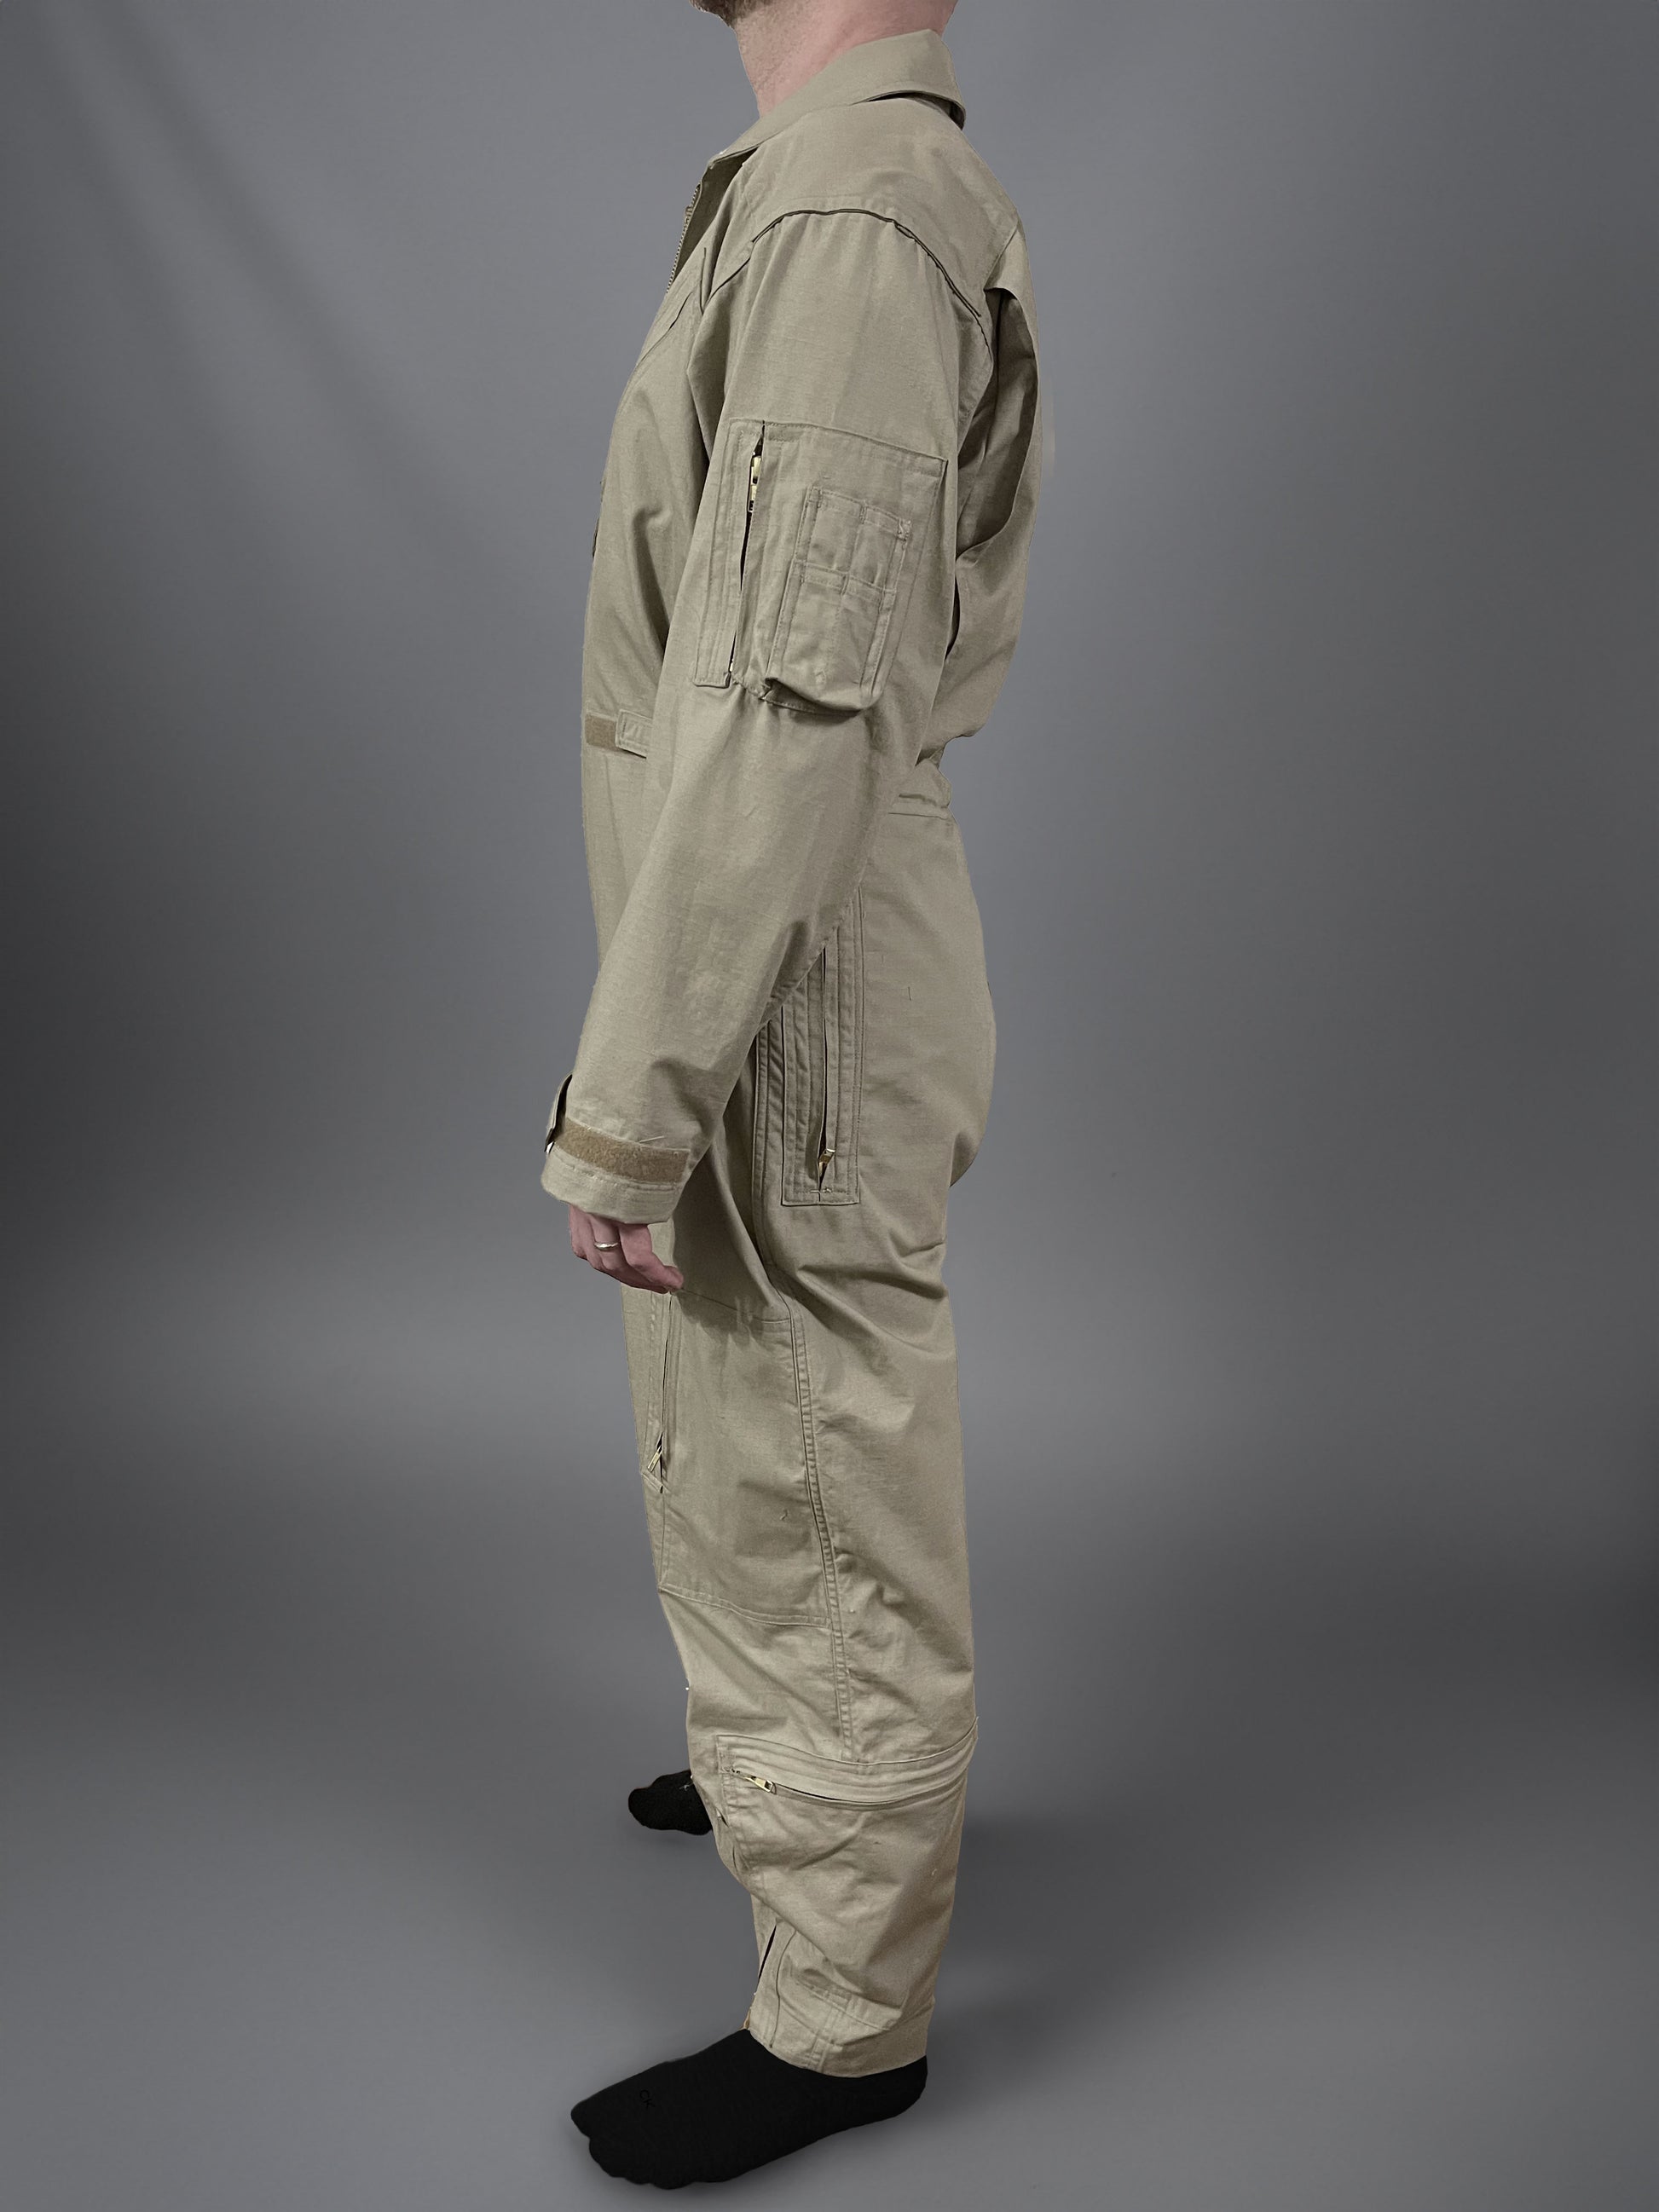 New high-end Ghostbusters flight suit brand 'EctoWear' launches